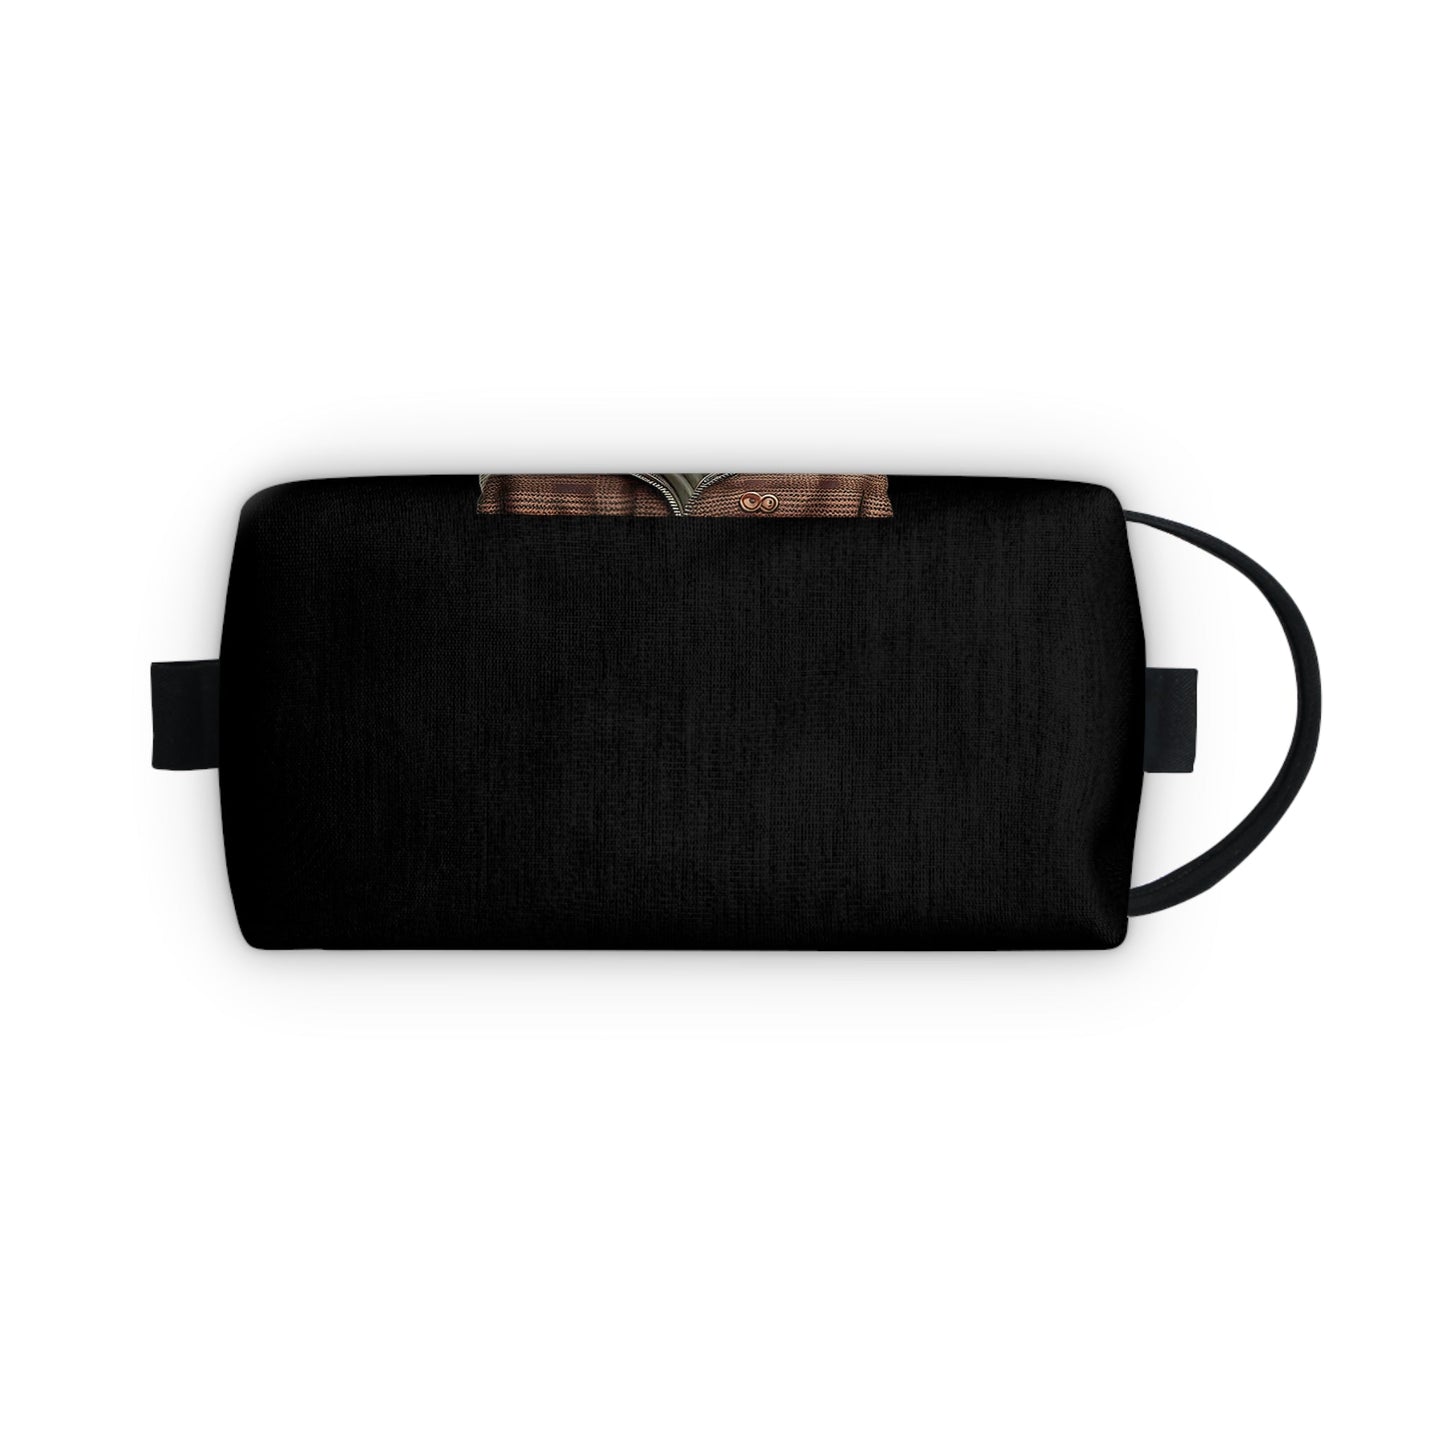 HORACE Trendy Travel Toiletry Bag | Fashionable Cosmetic Cases